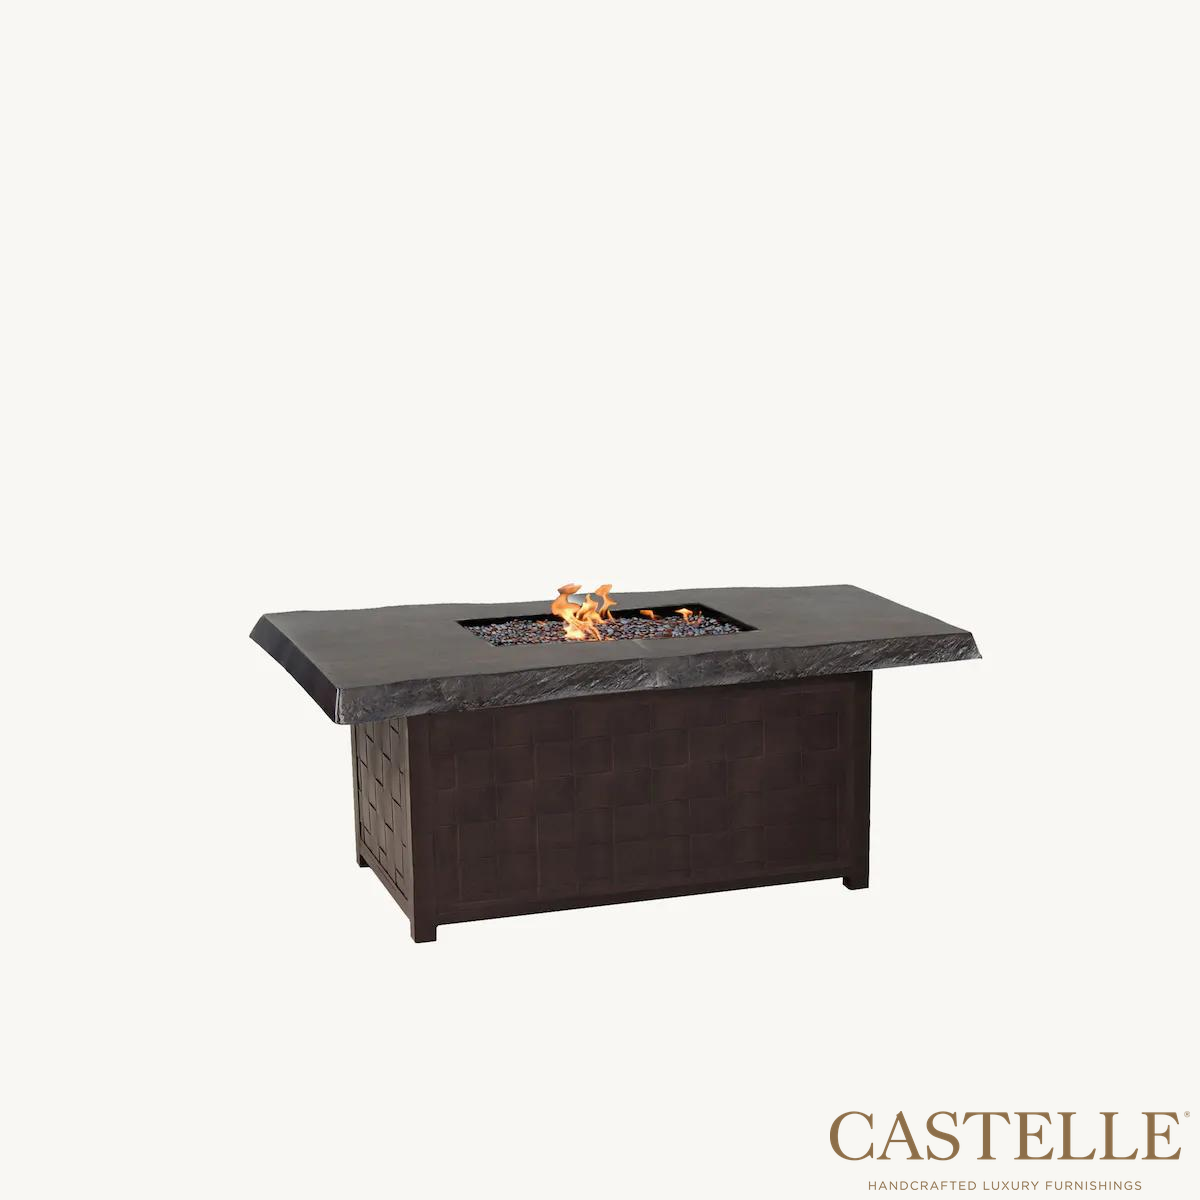 Classical 36" X 52" Rectangular Coffee Table With Firepit